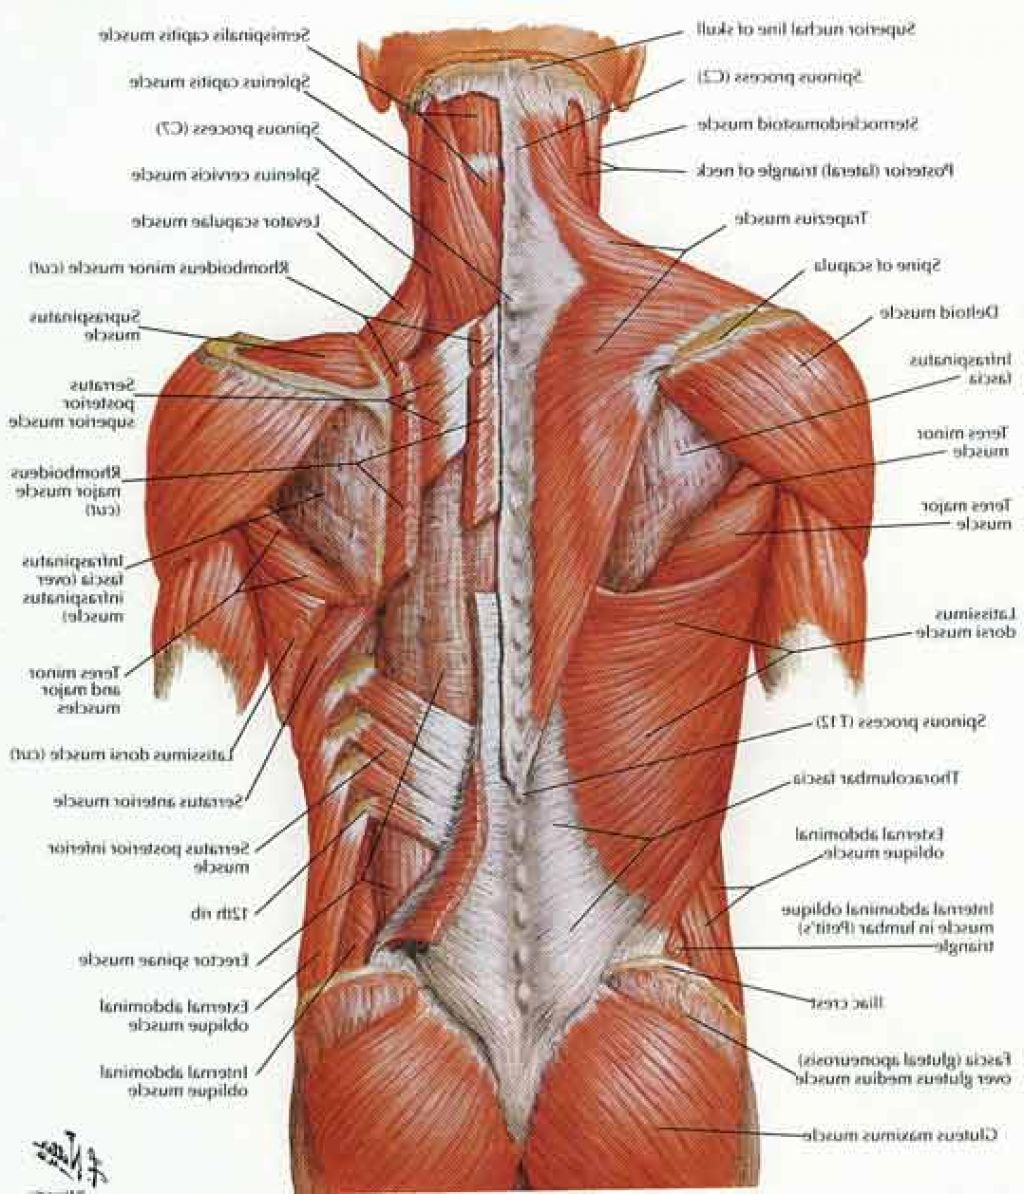 Back Muscle Diagram Low Back Muscles Anatomy Lower Back Muscles Diagram Lower Back